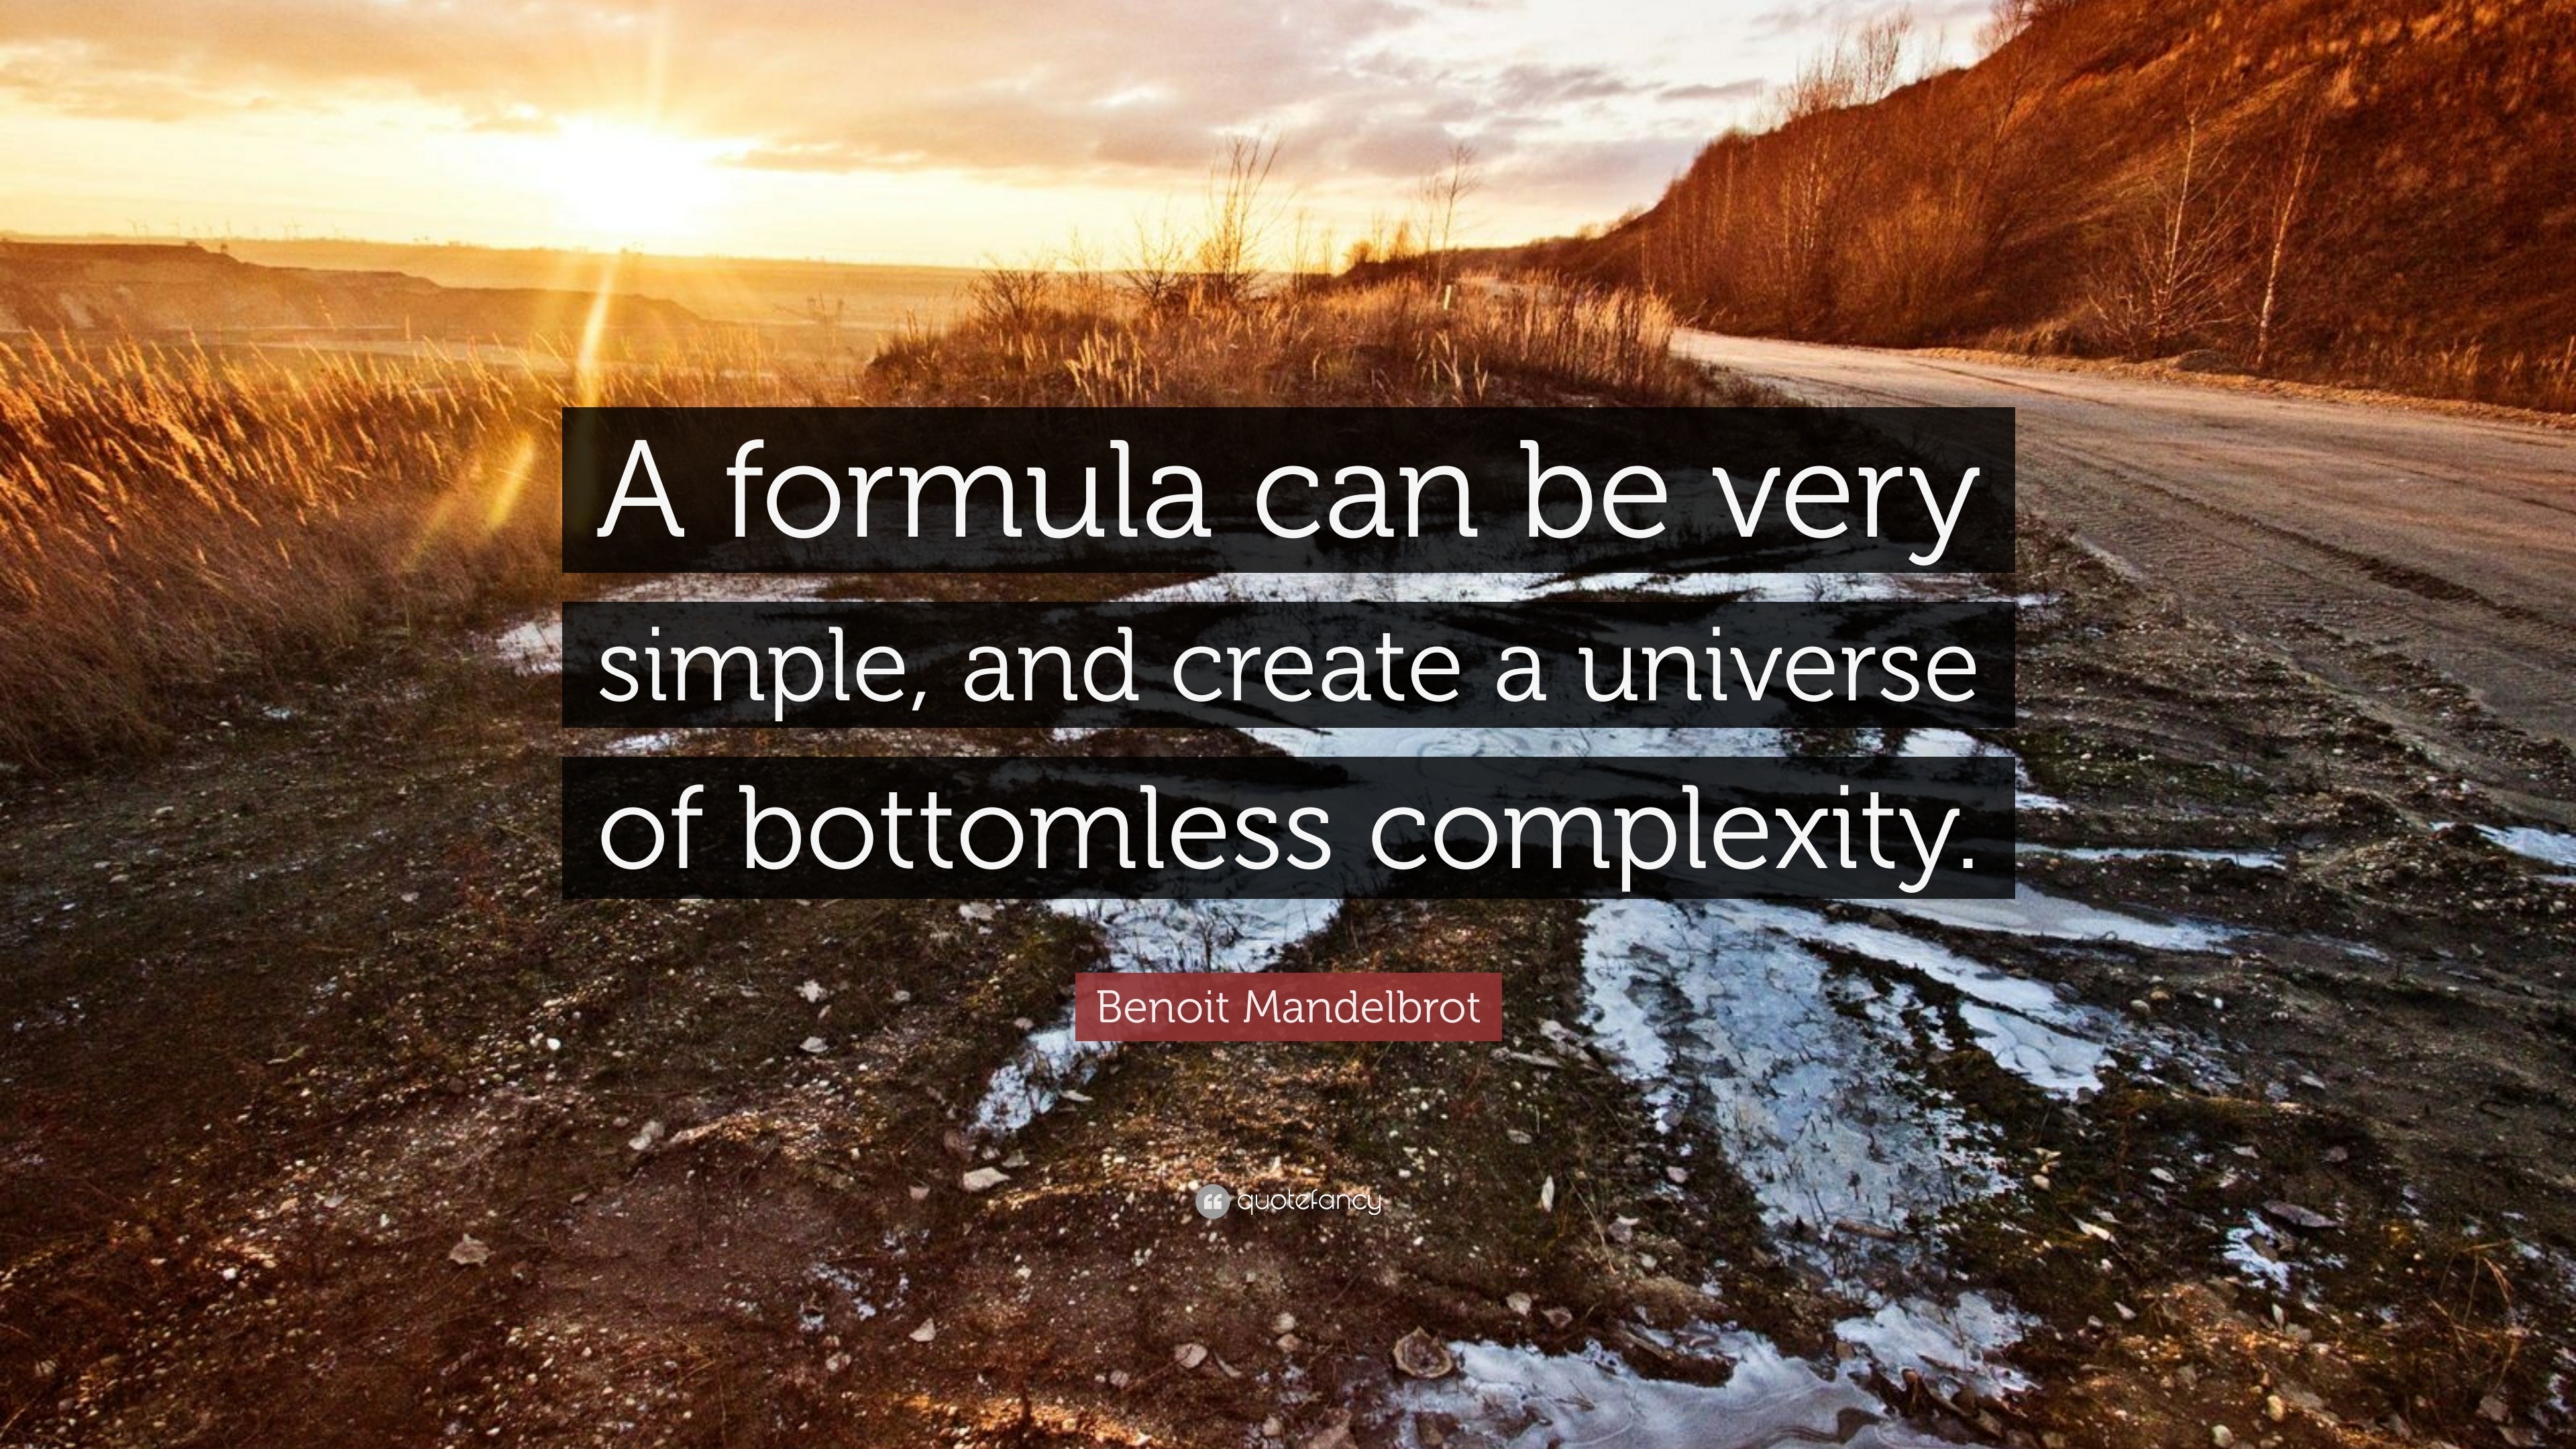 Benoit Mandelbrot Quote A Formula Can Be Very Simple And Create Images, Photos, Reviews